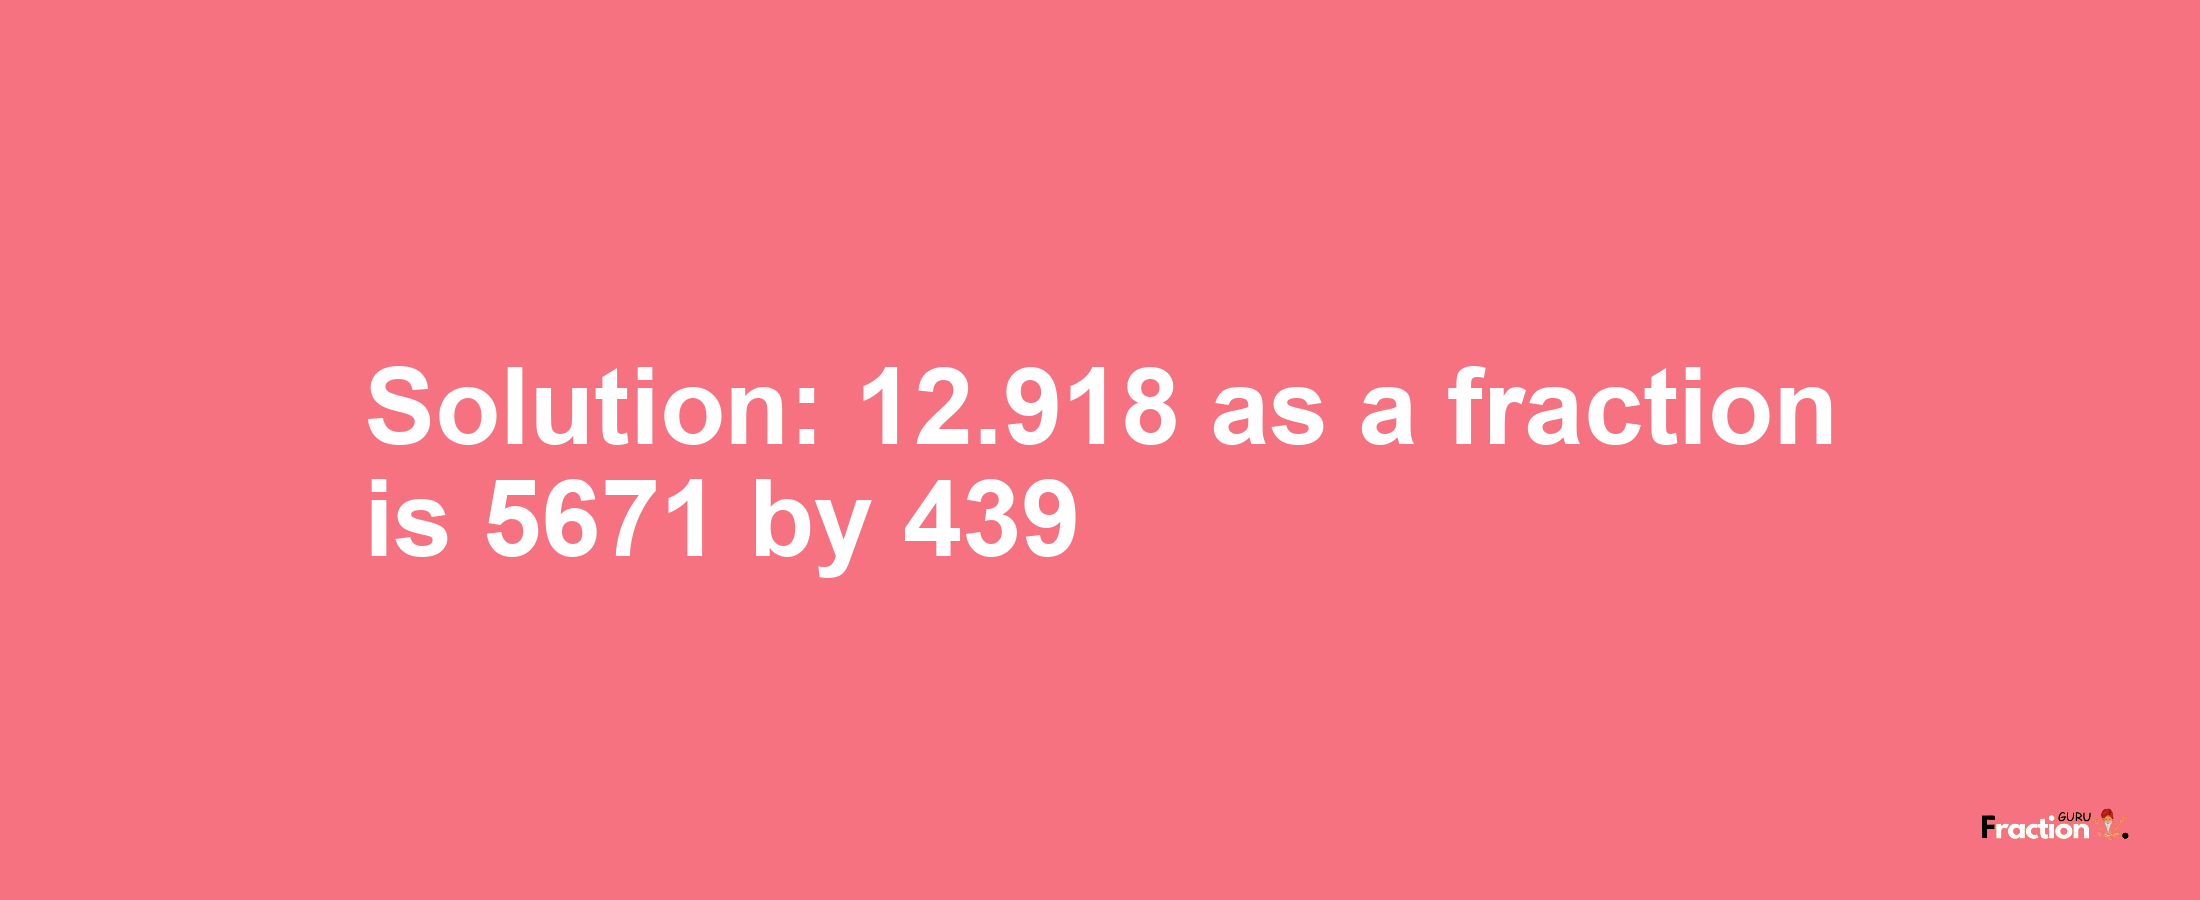 Solution:12.918 as a fraction is 5671/439